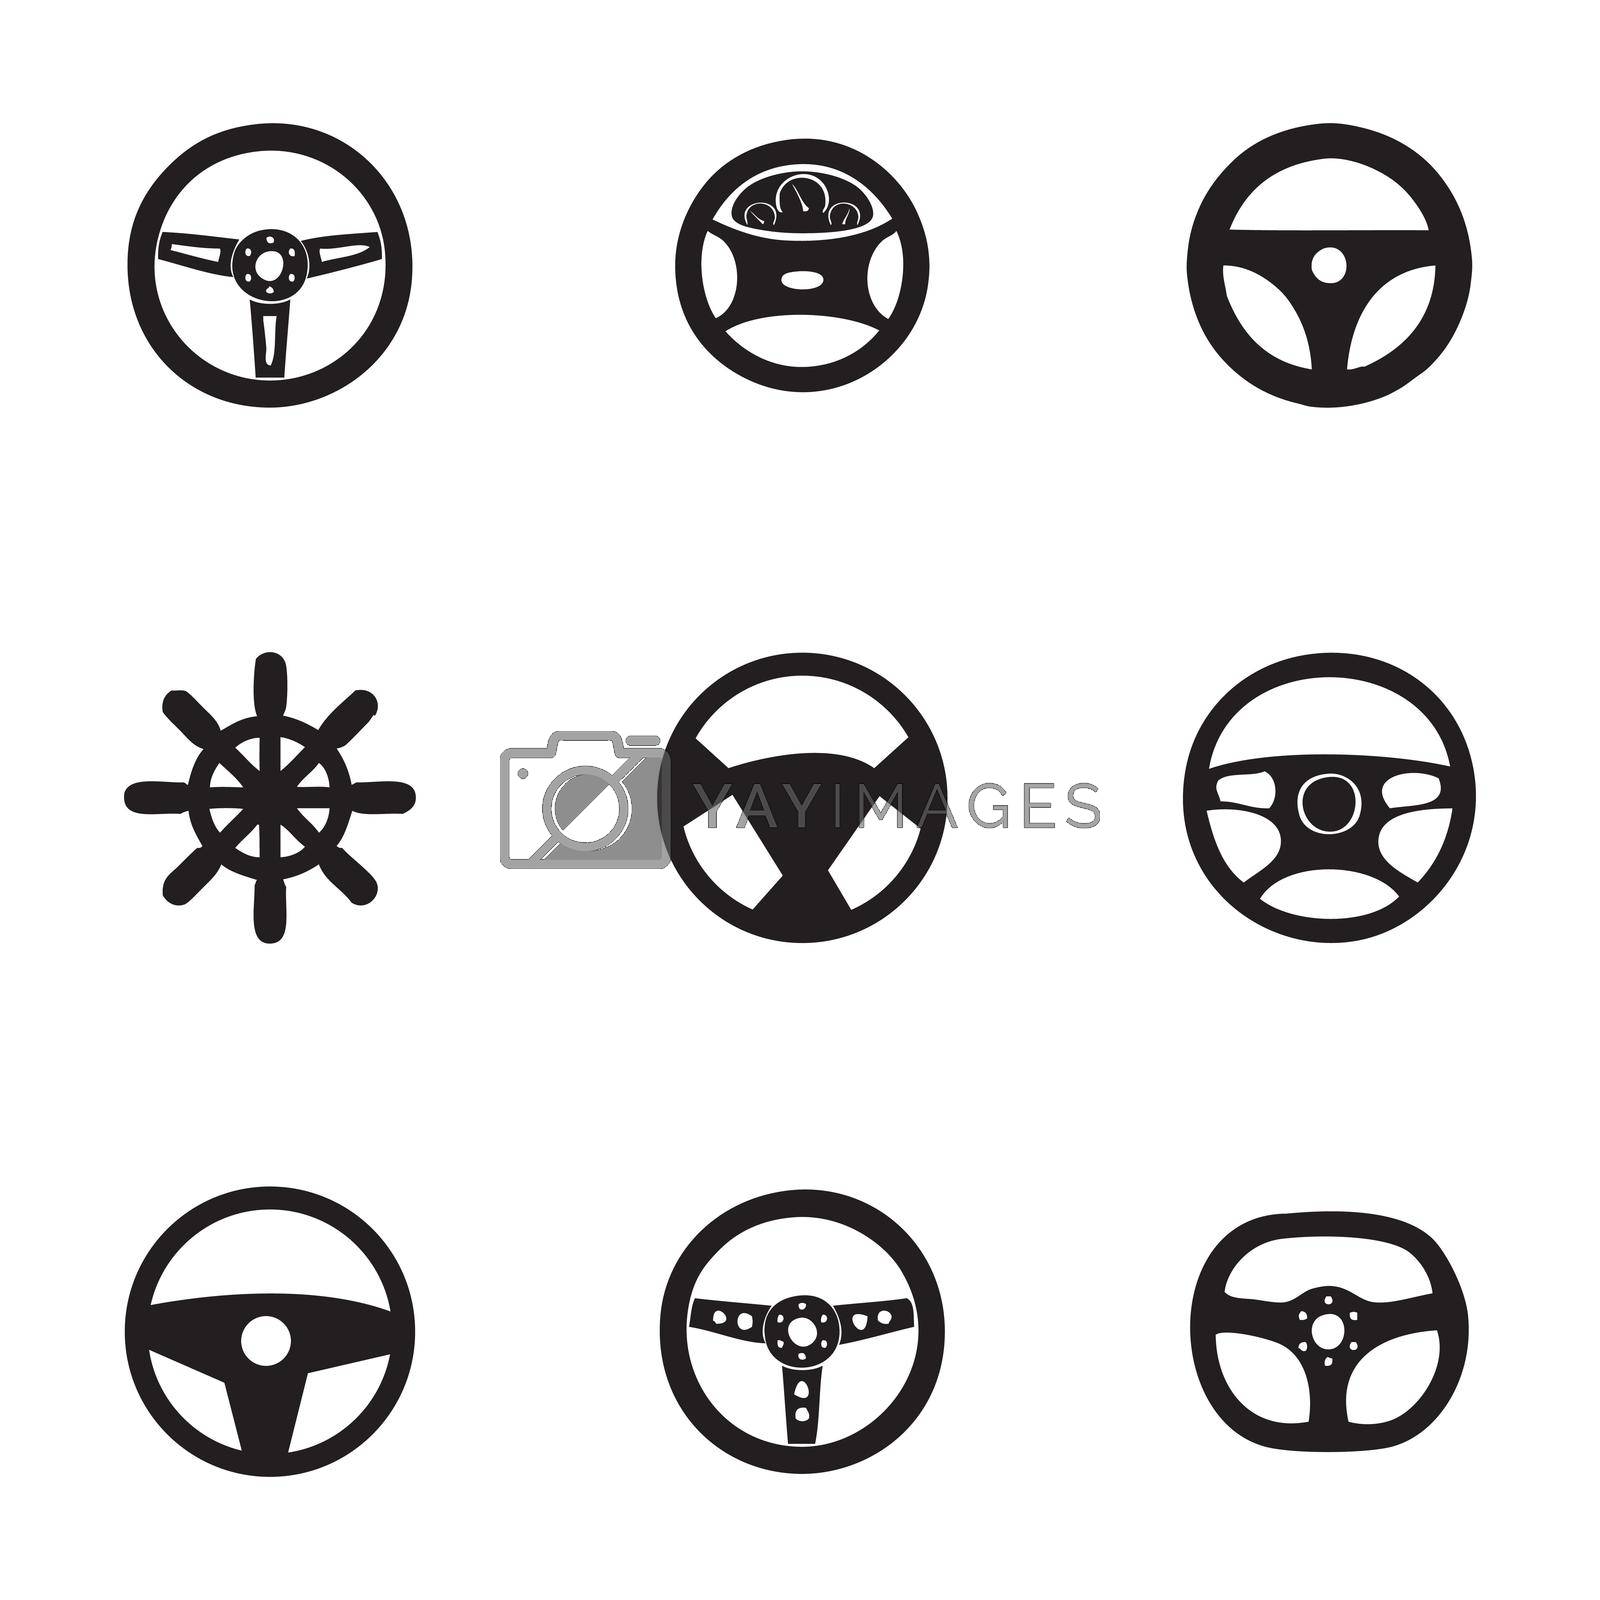 Royalty free image of Vector steering wheels icon set by Daiko